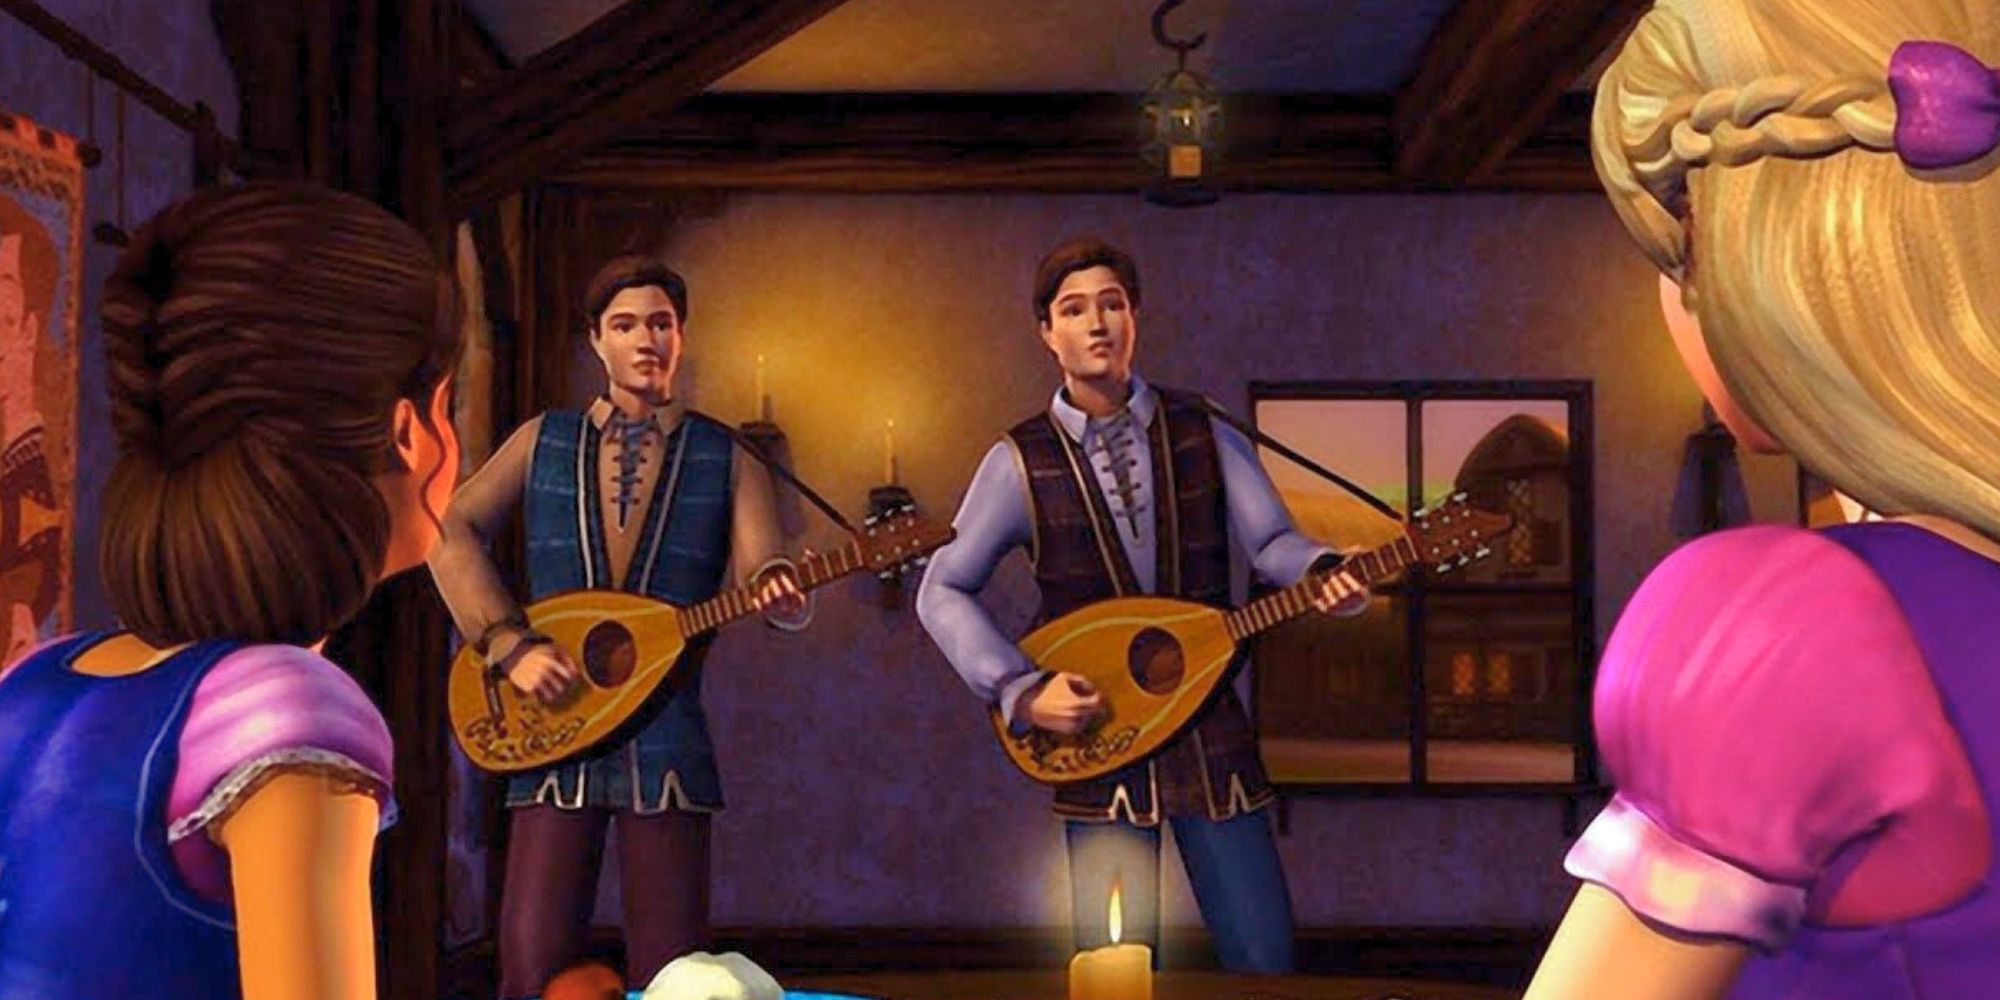 Jeremy and Ian serenading Alexa and Liana on their guitars in Barbie and the Diamond Castle